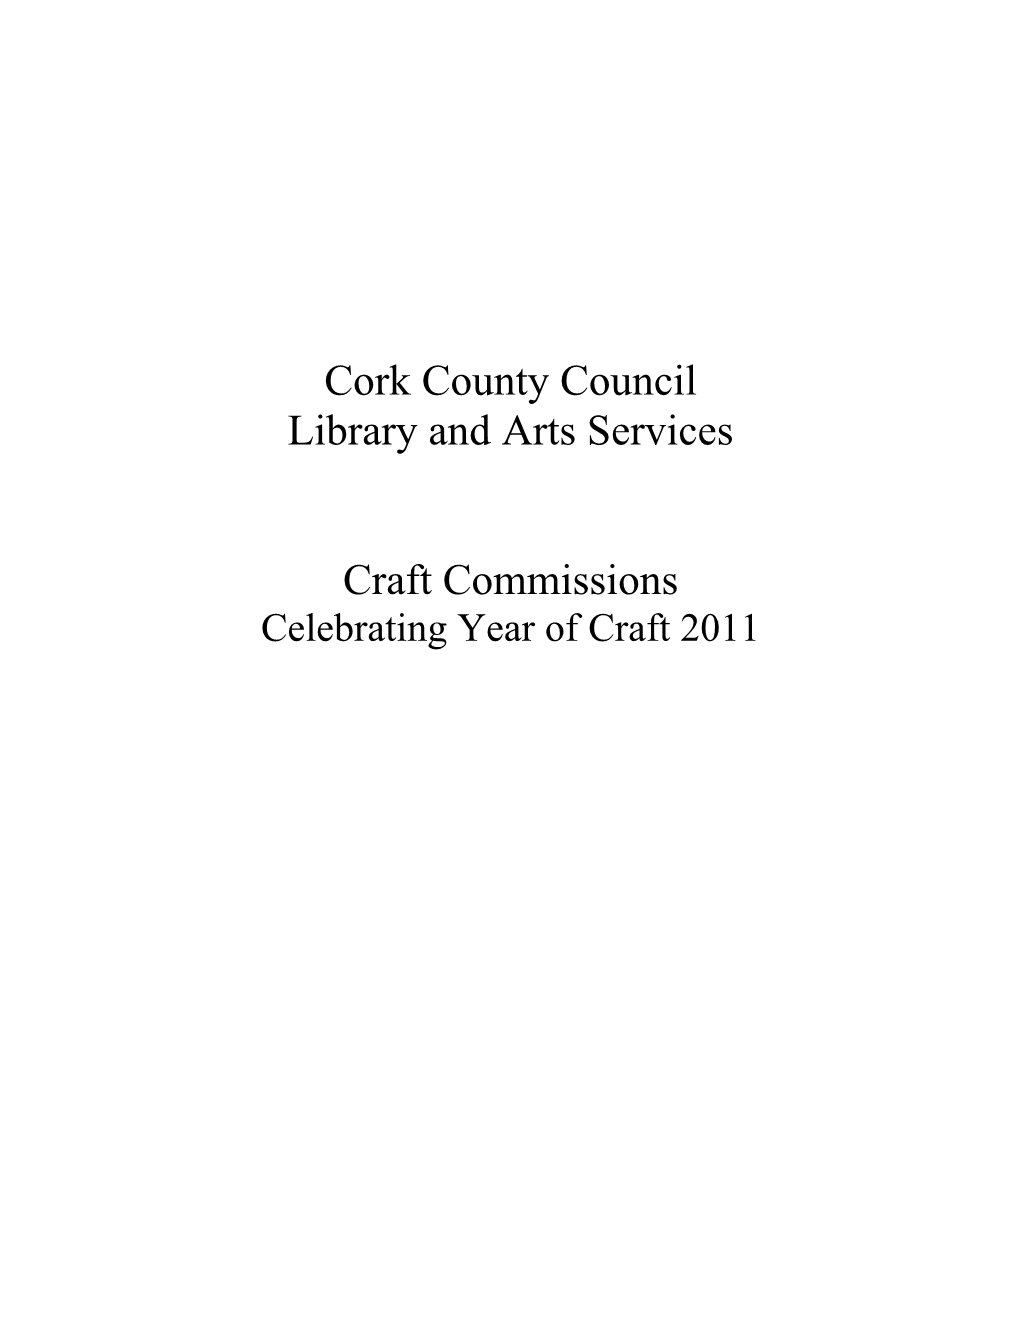 Cork County Library and Arts Services